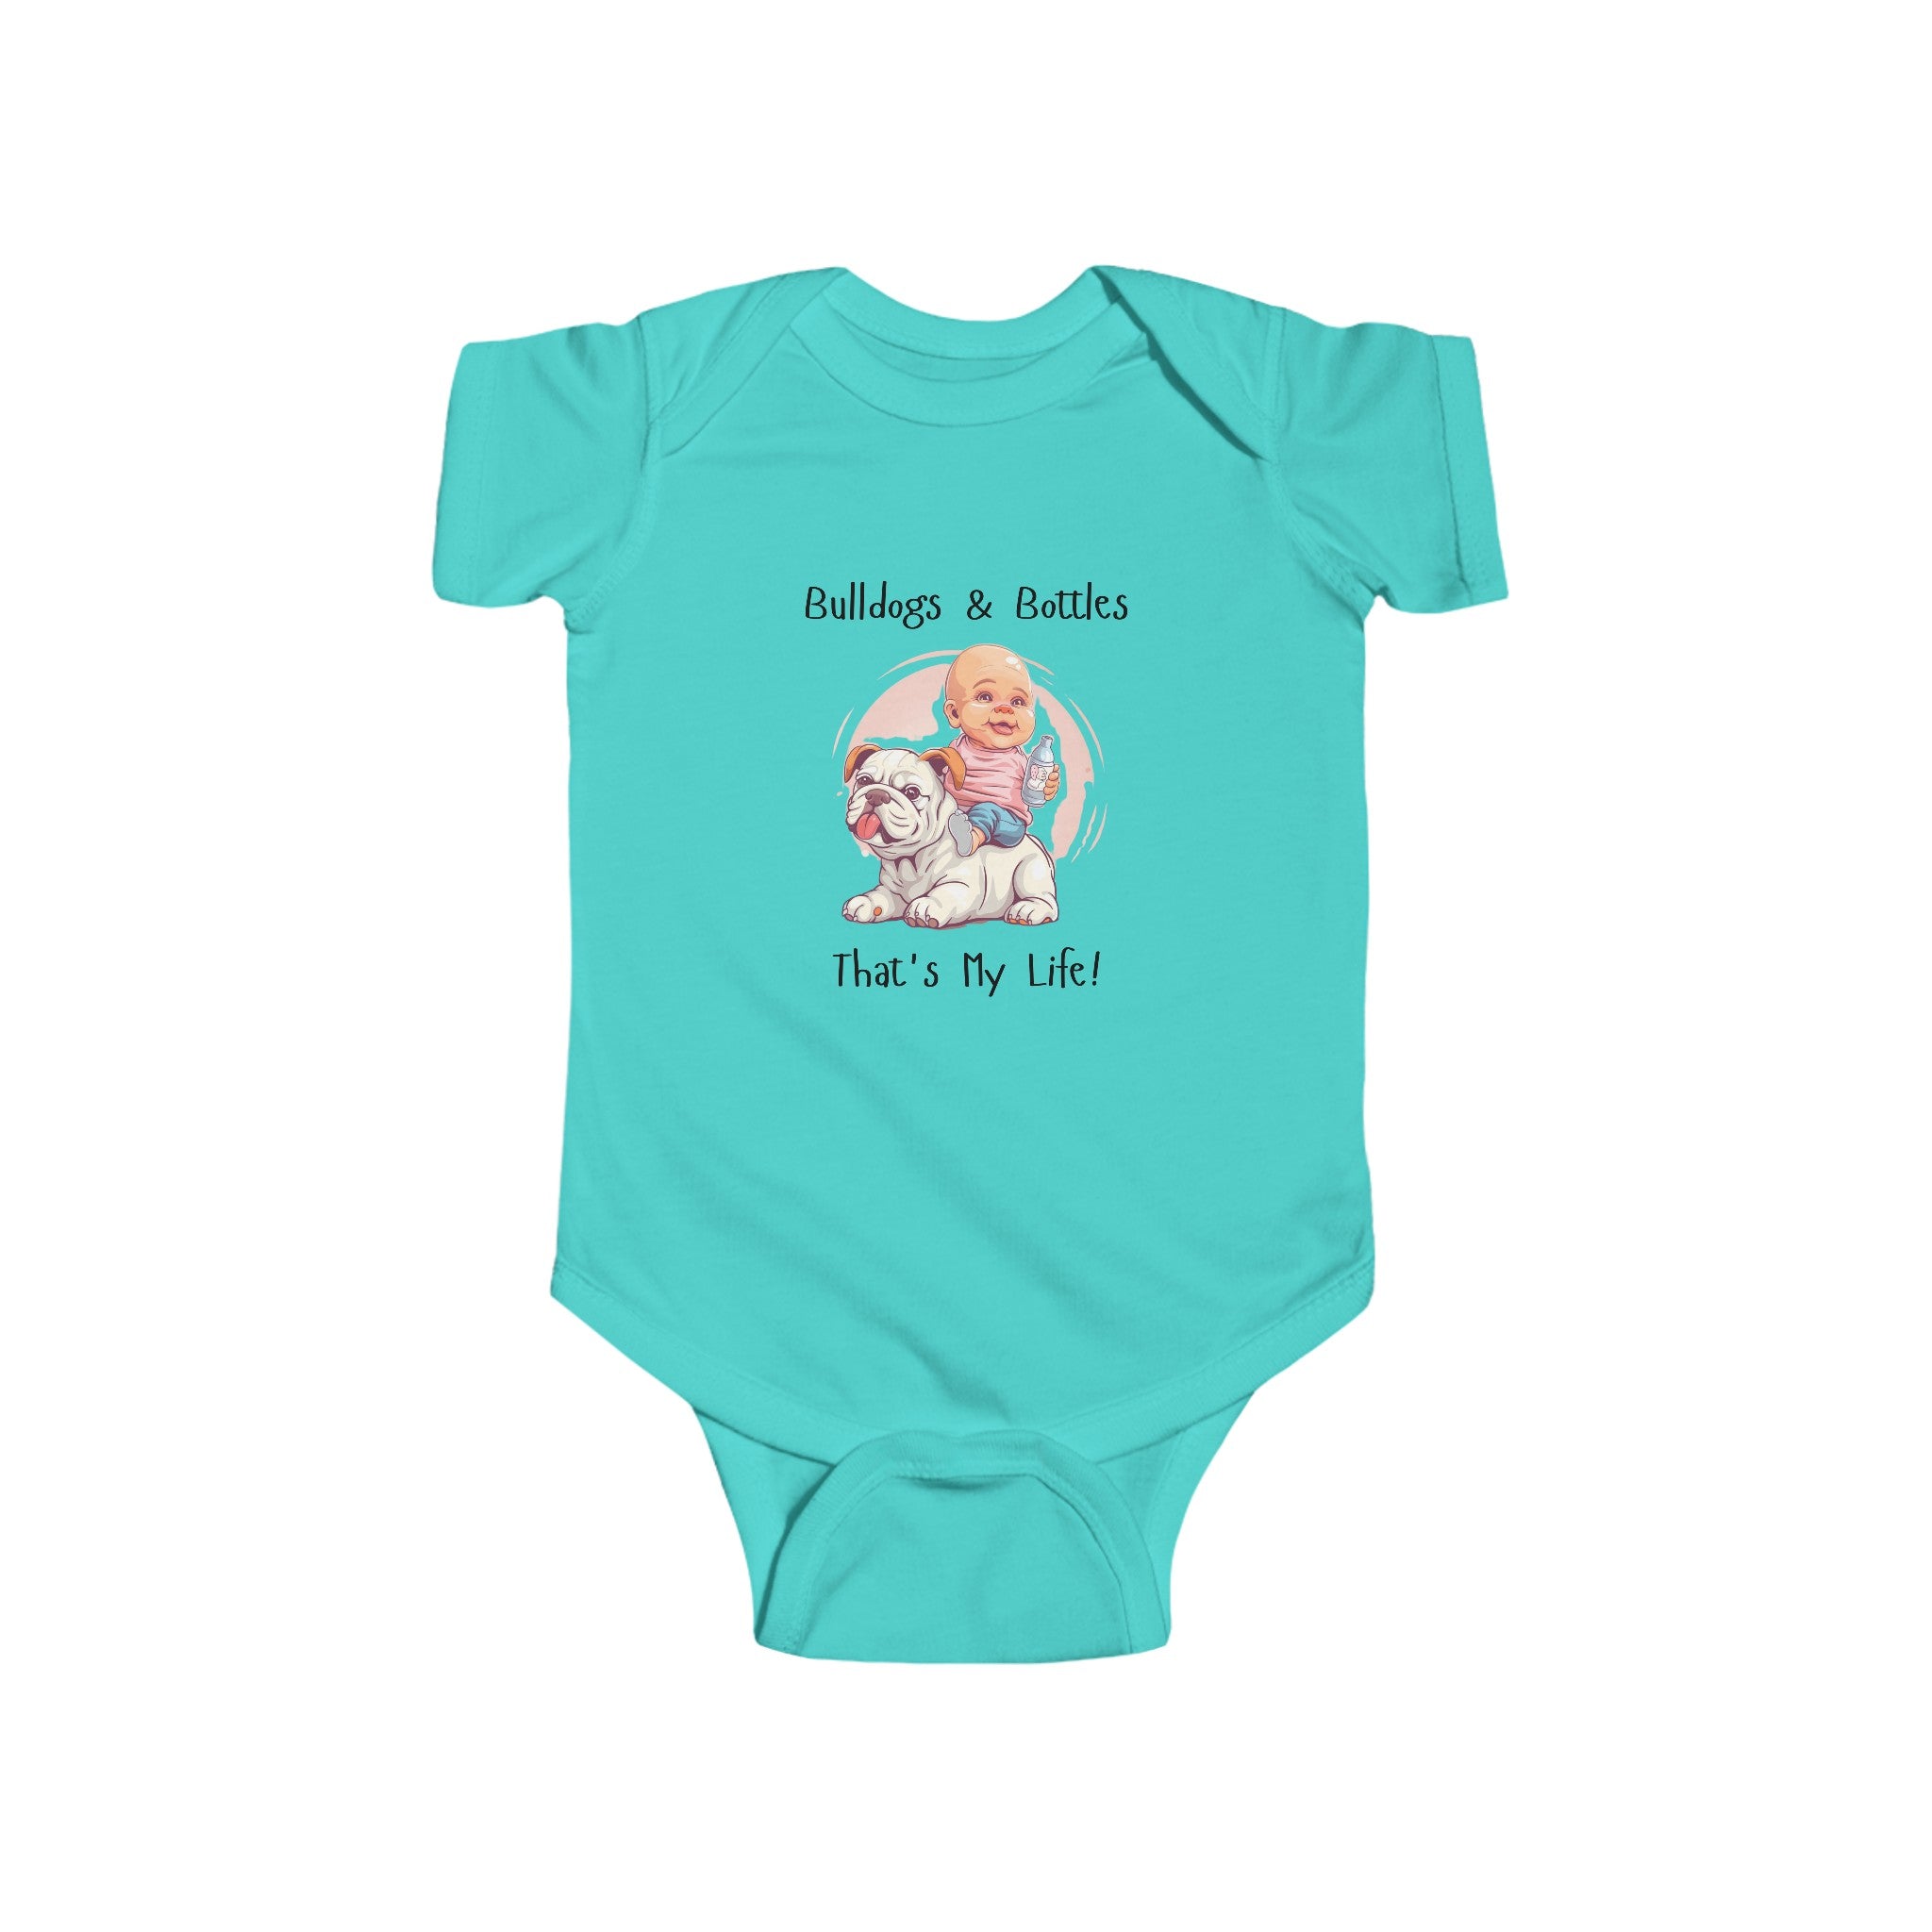 Bulldogs and Bottles, That's My Life!" Baby Onesie (English/Girl)